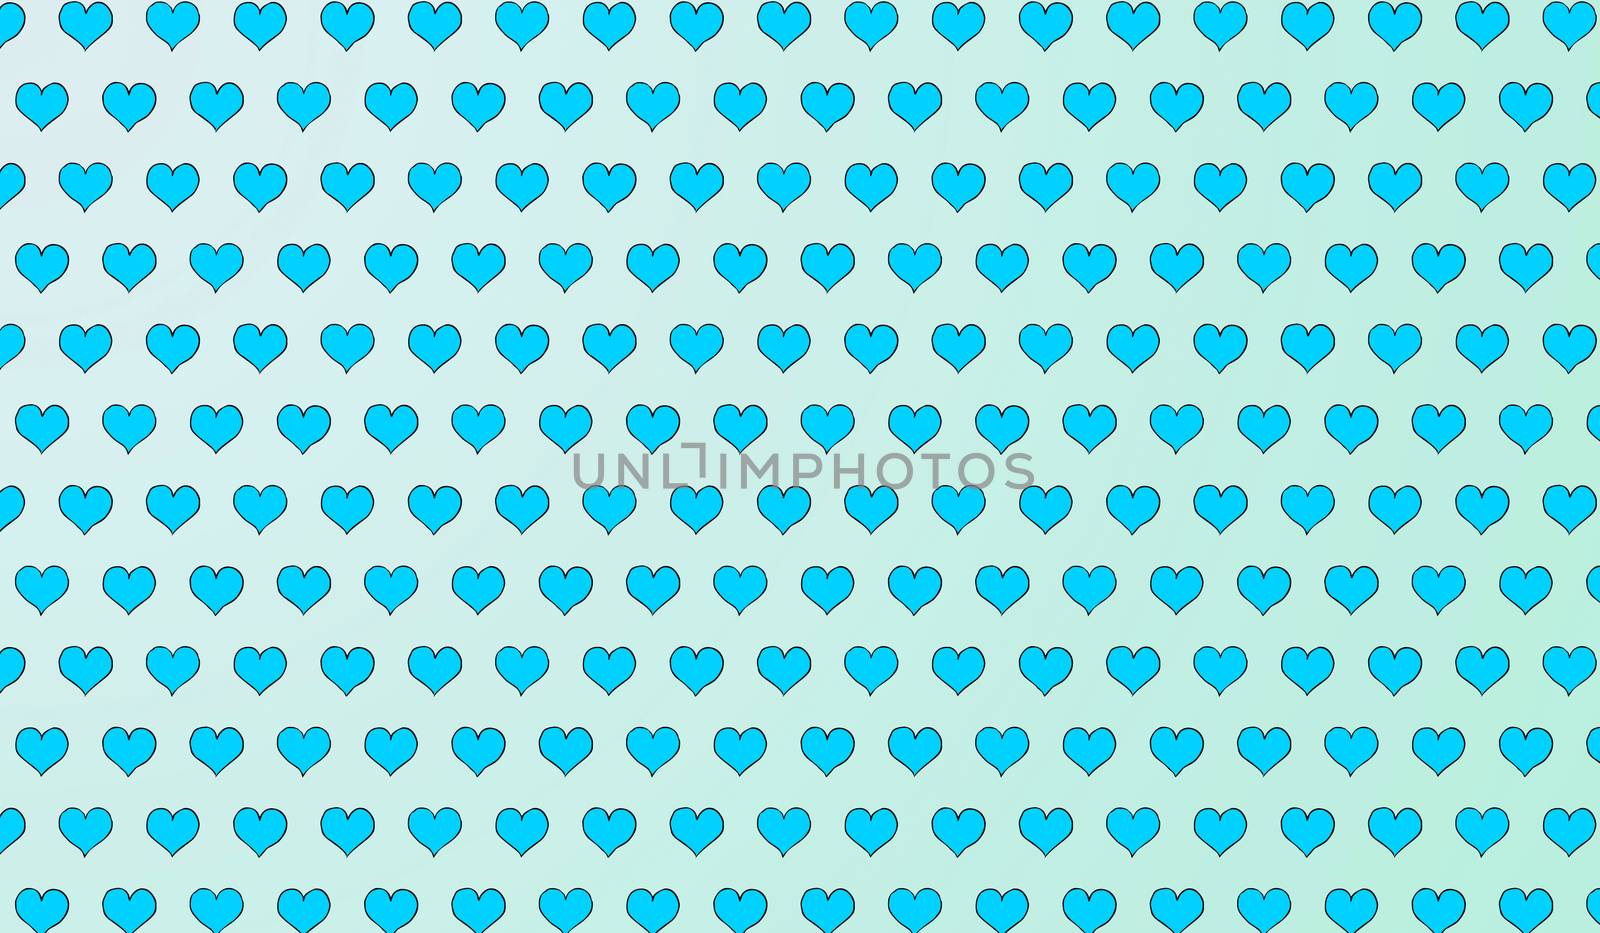 2d azure pattern of cartoon hearts on isolated background by Andreajk3